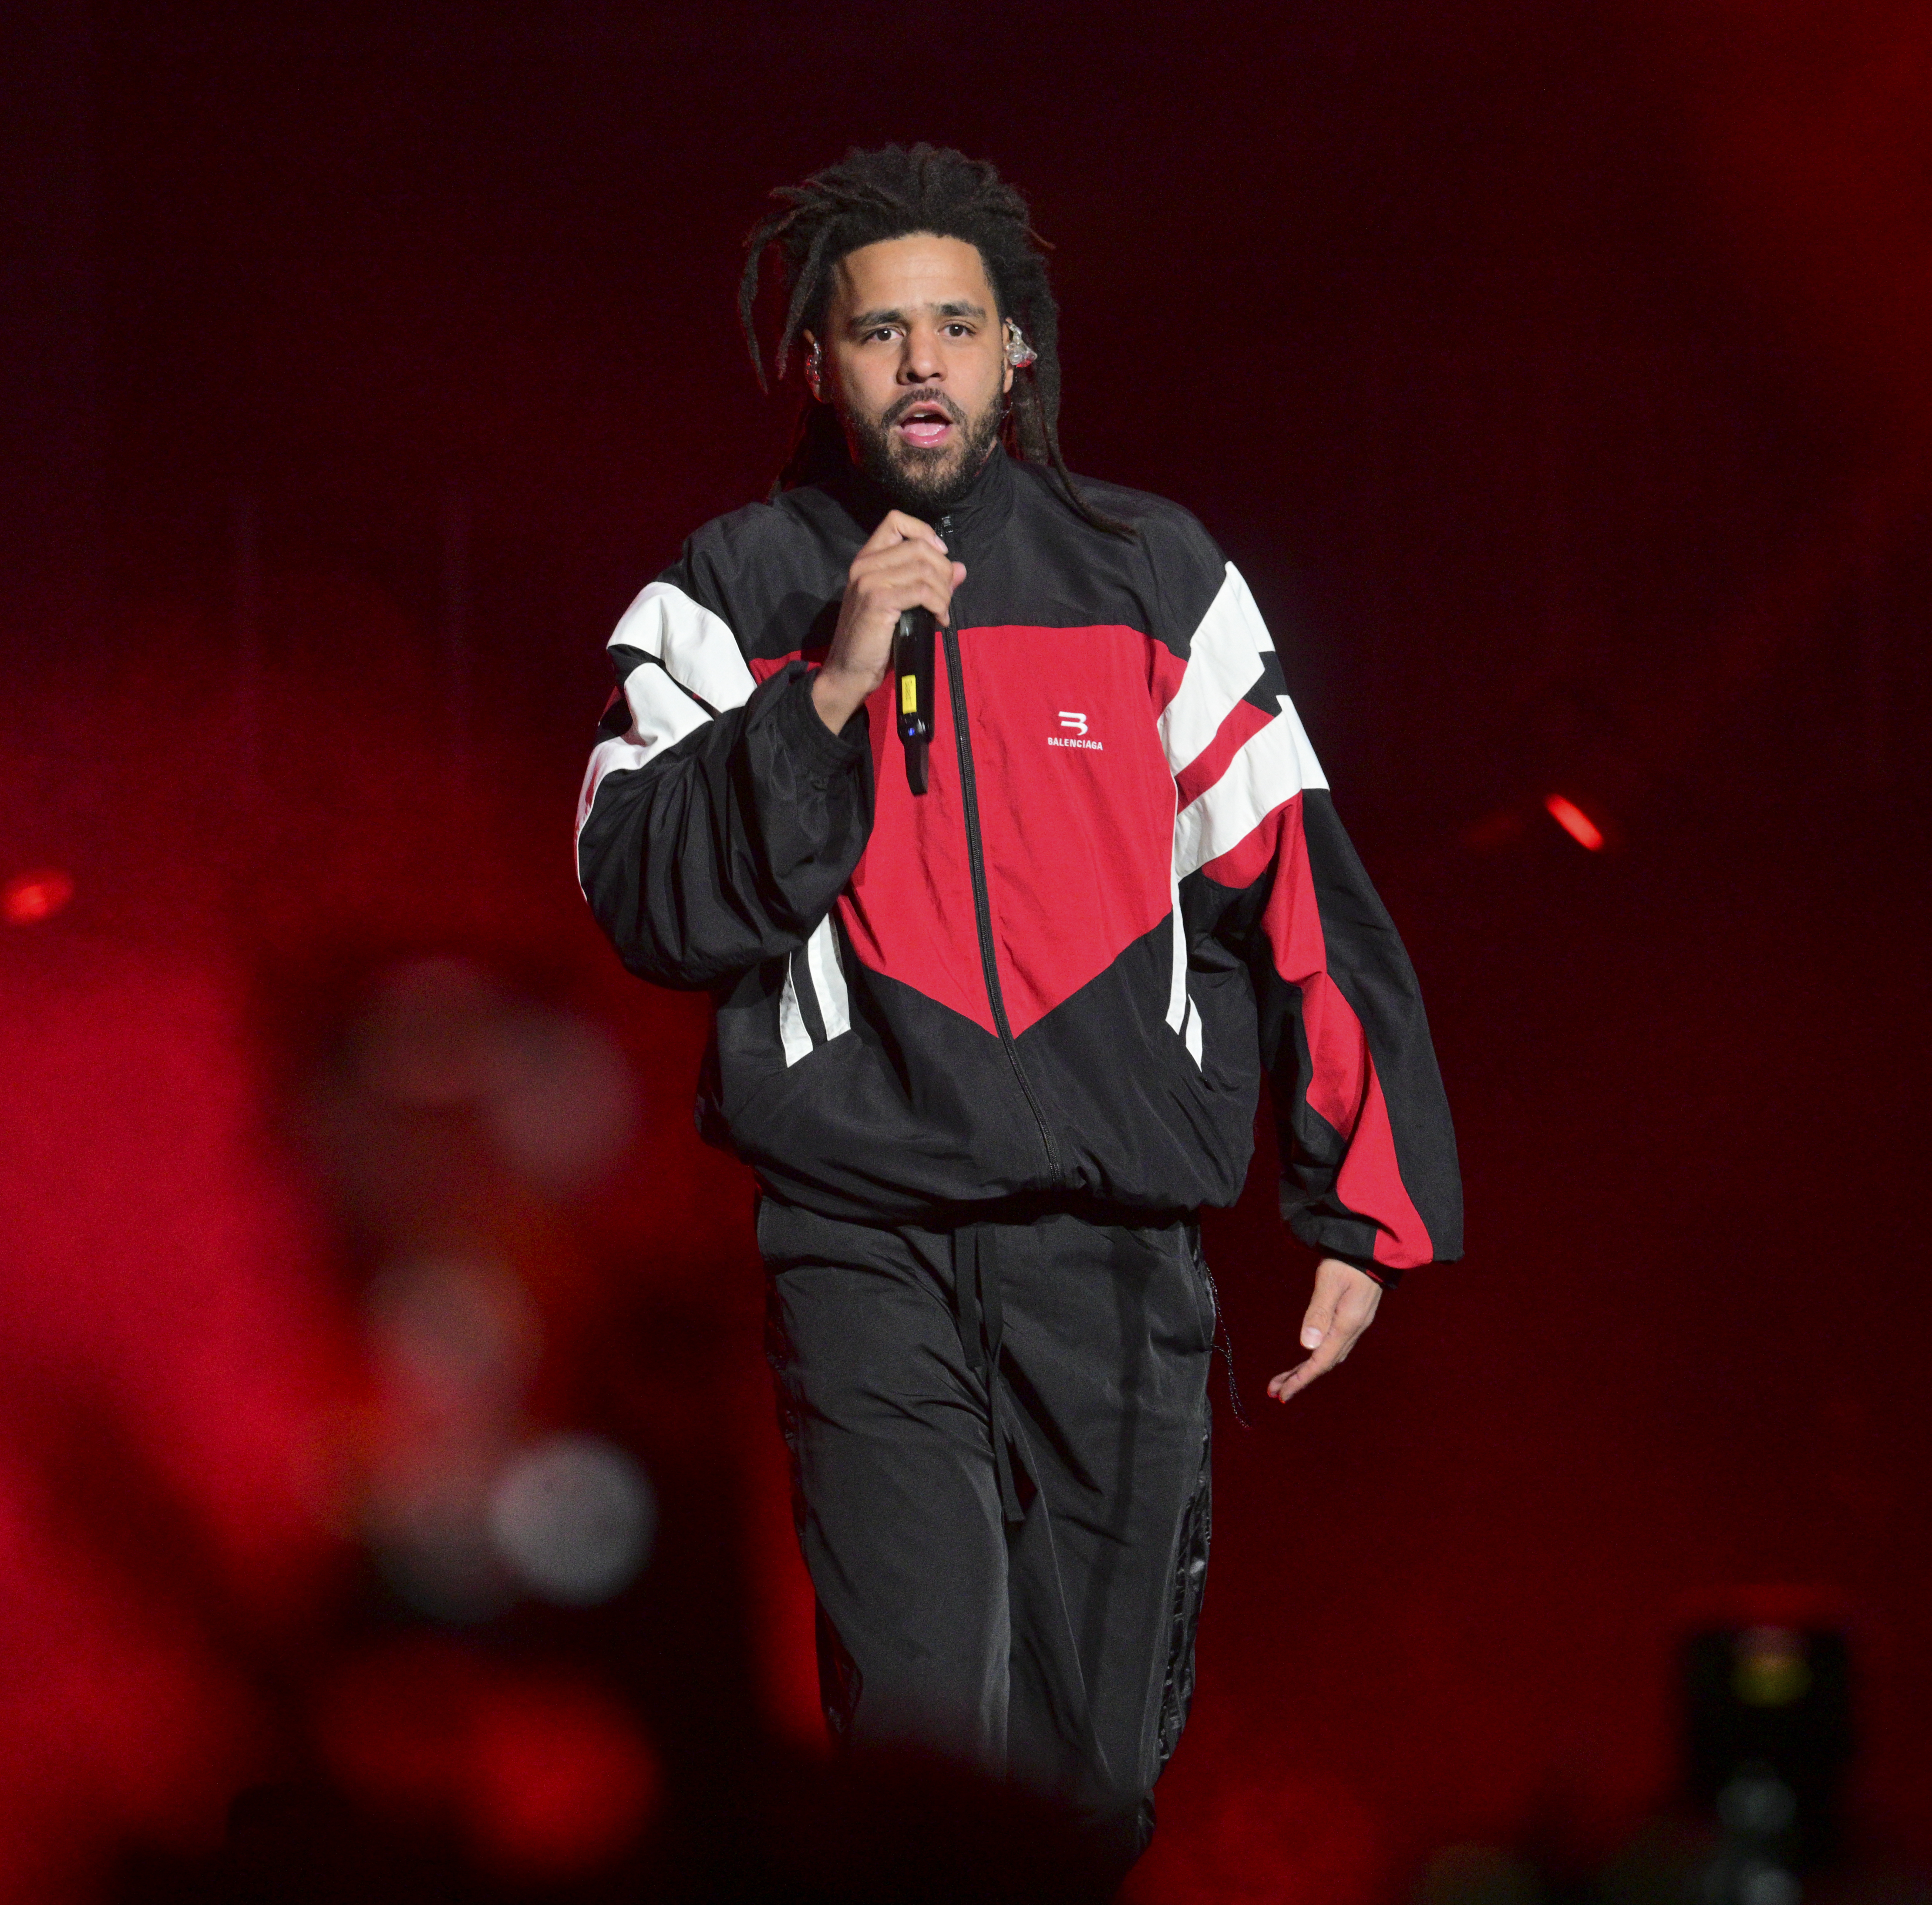 J. Cole said he would 'humble' the rapper and labeled his diss as a 'warning shot'